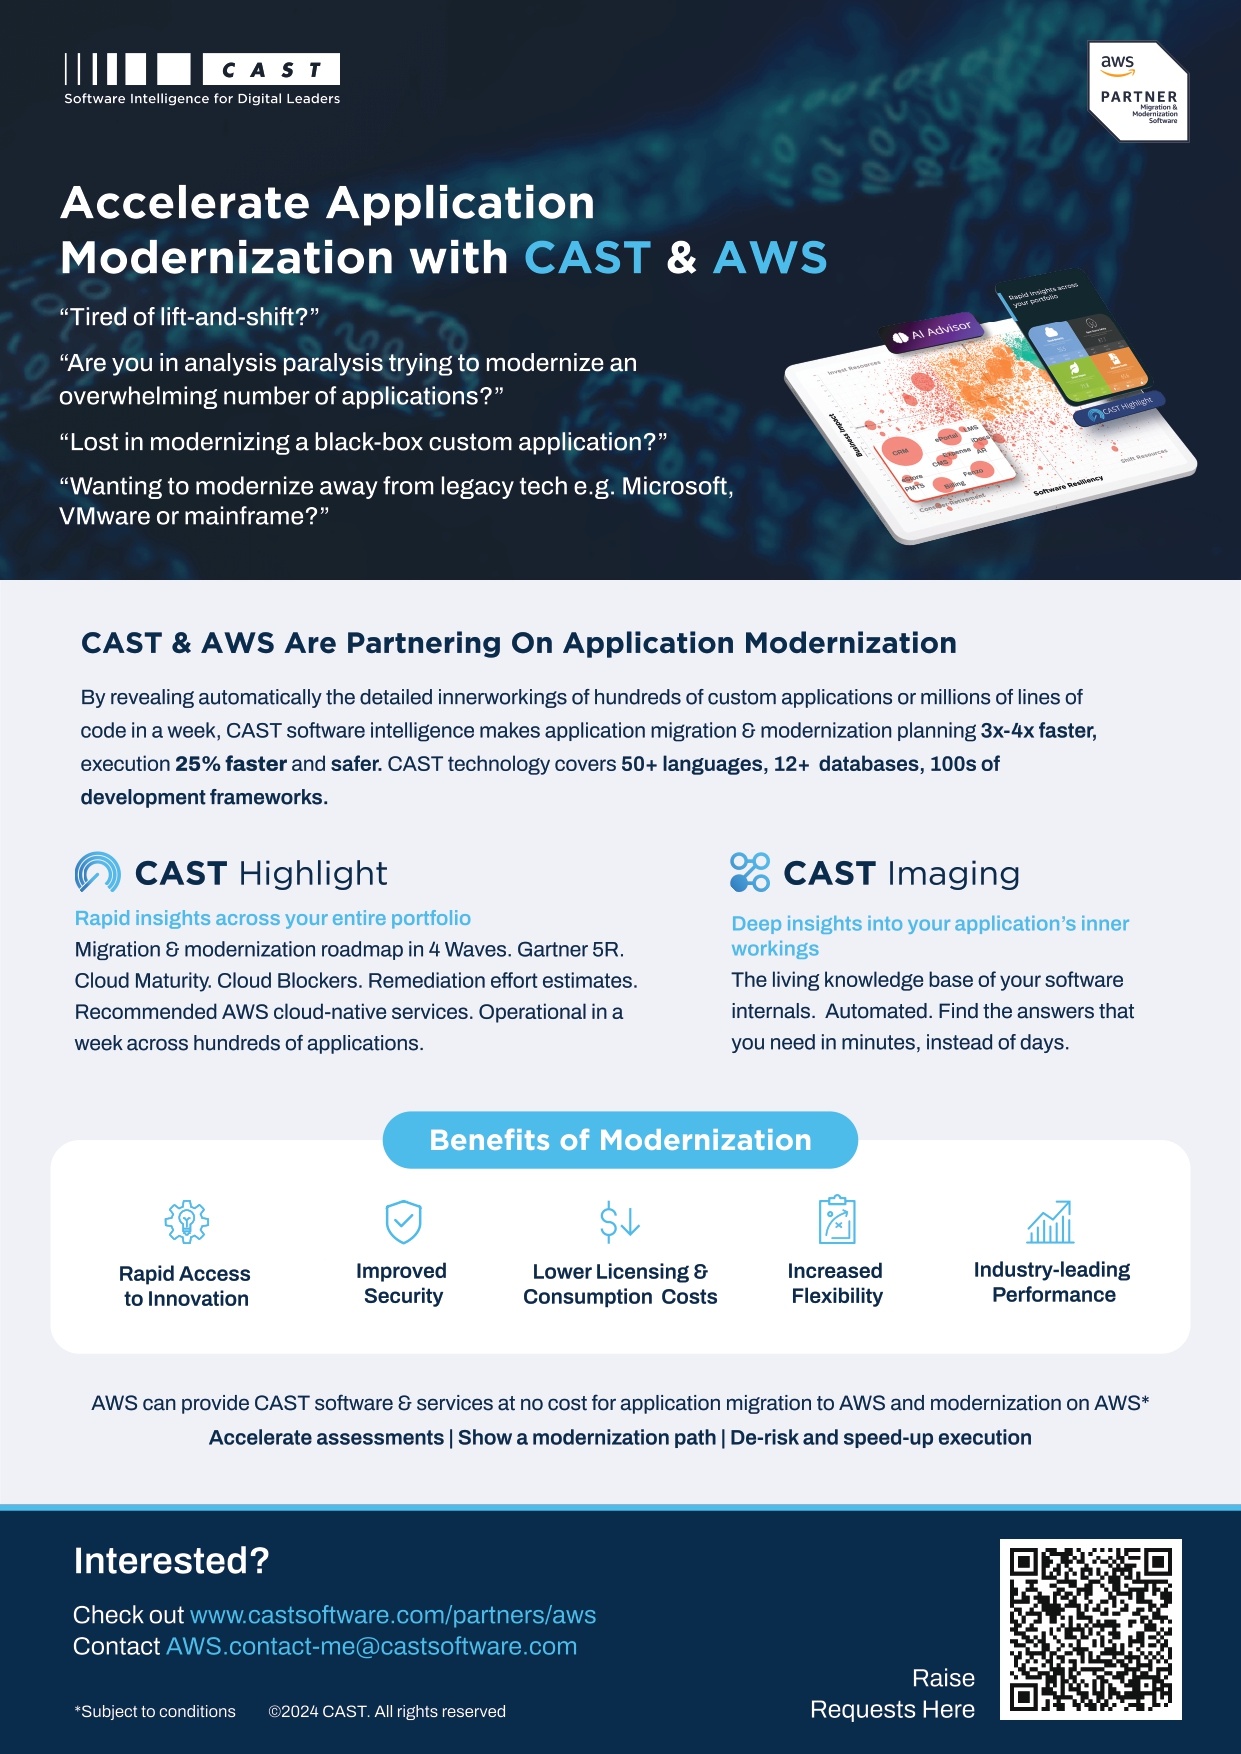 Accelerate Application Modernization with CAST and AWS